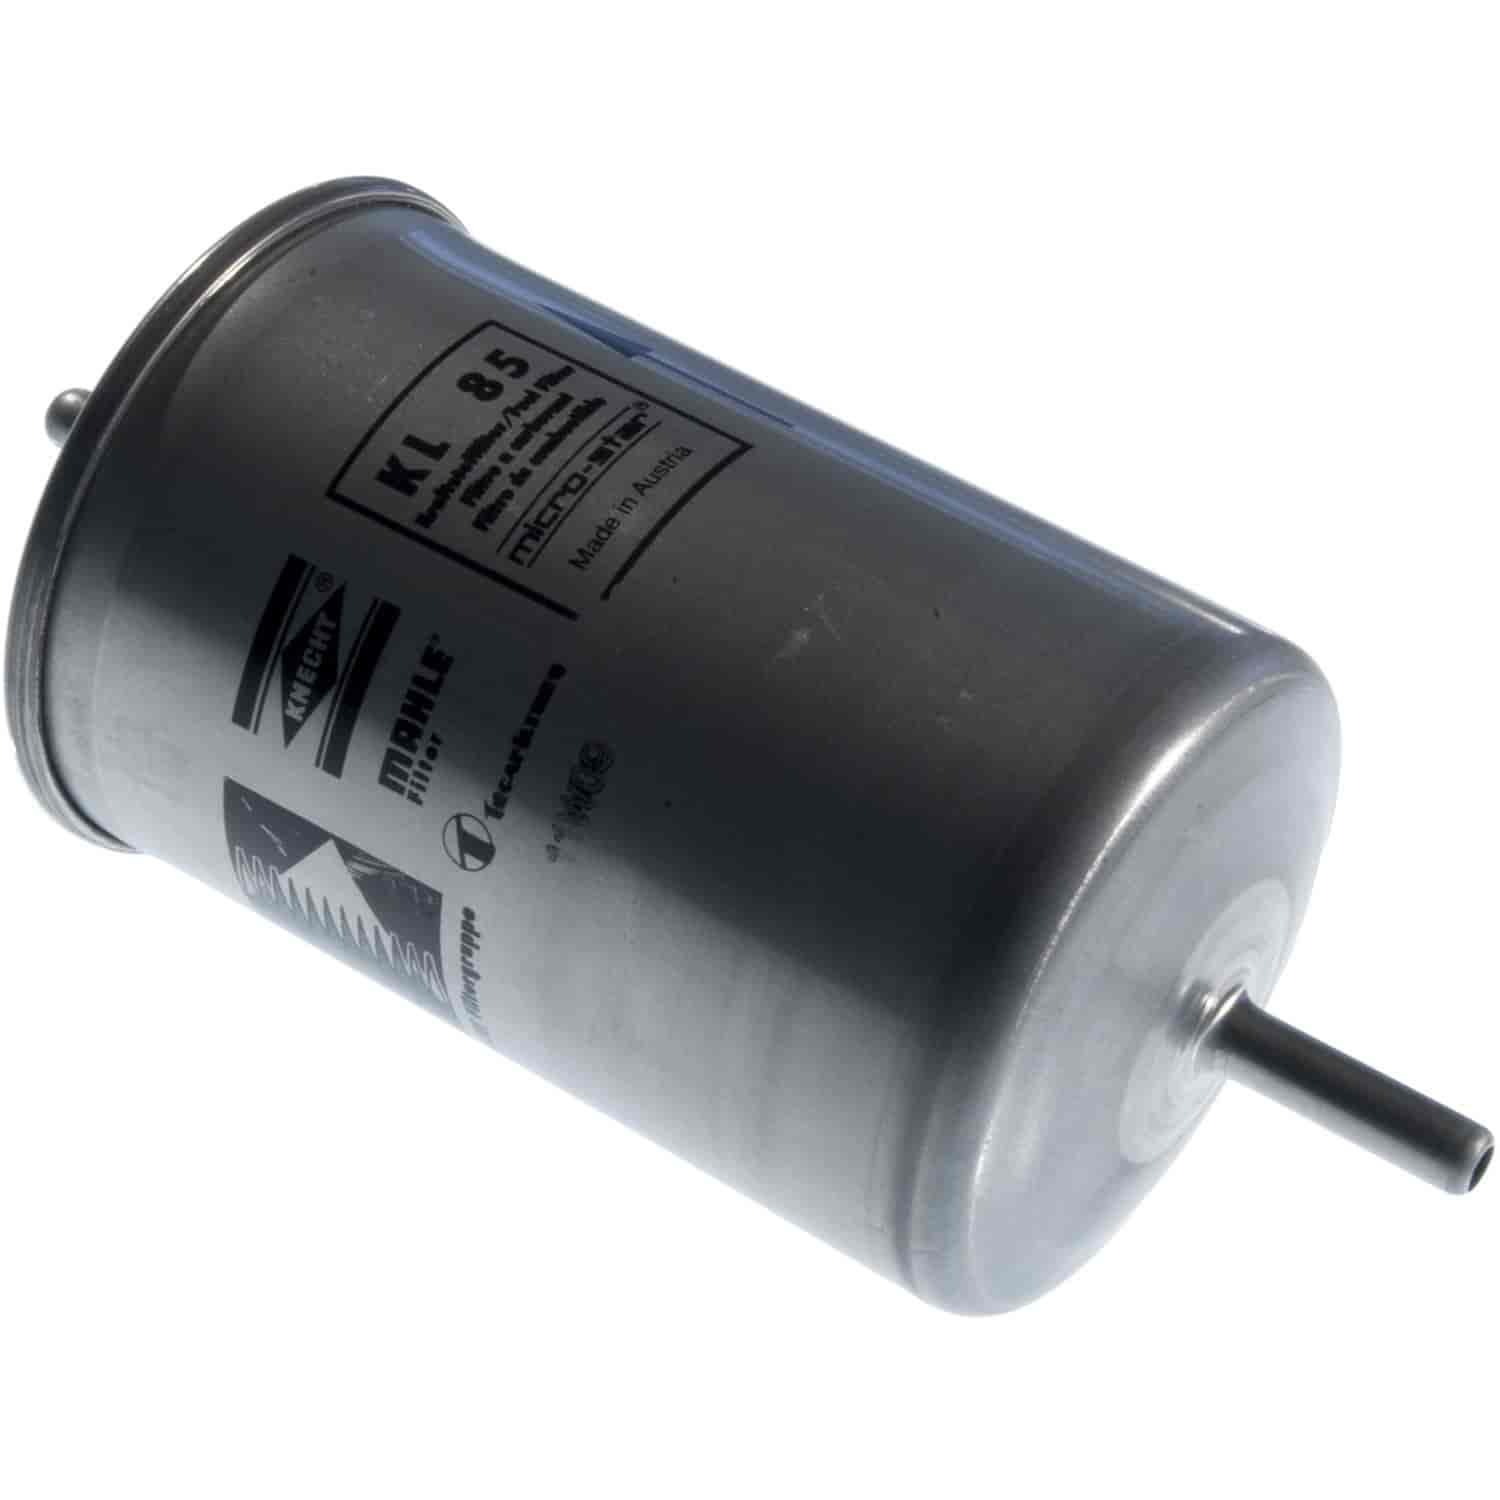 Mahle Fuel Filter Volvo C70 1998-2004 S70 1998-1999 V70 1998-2002 850 1993-1997